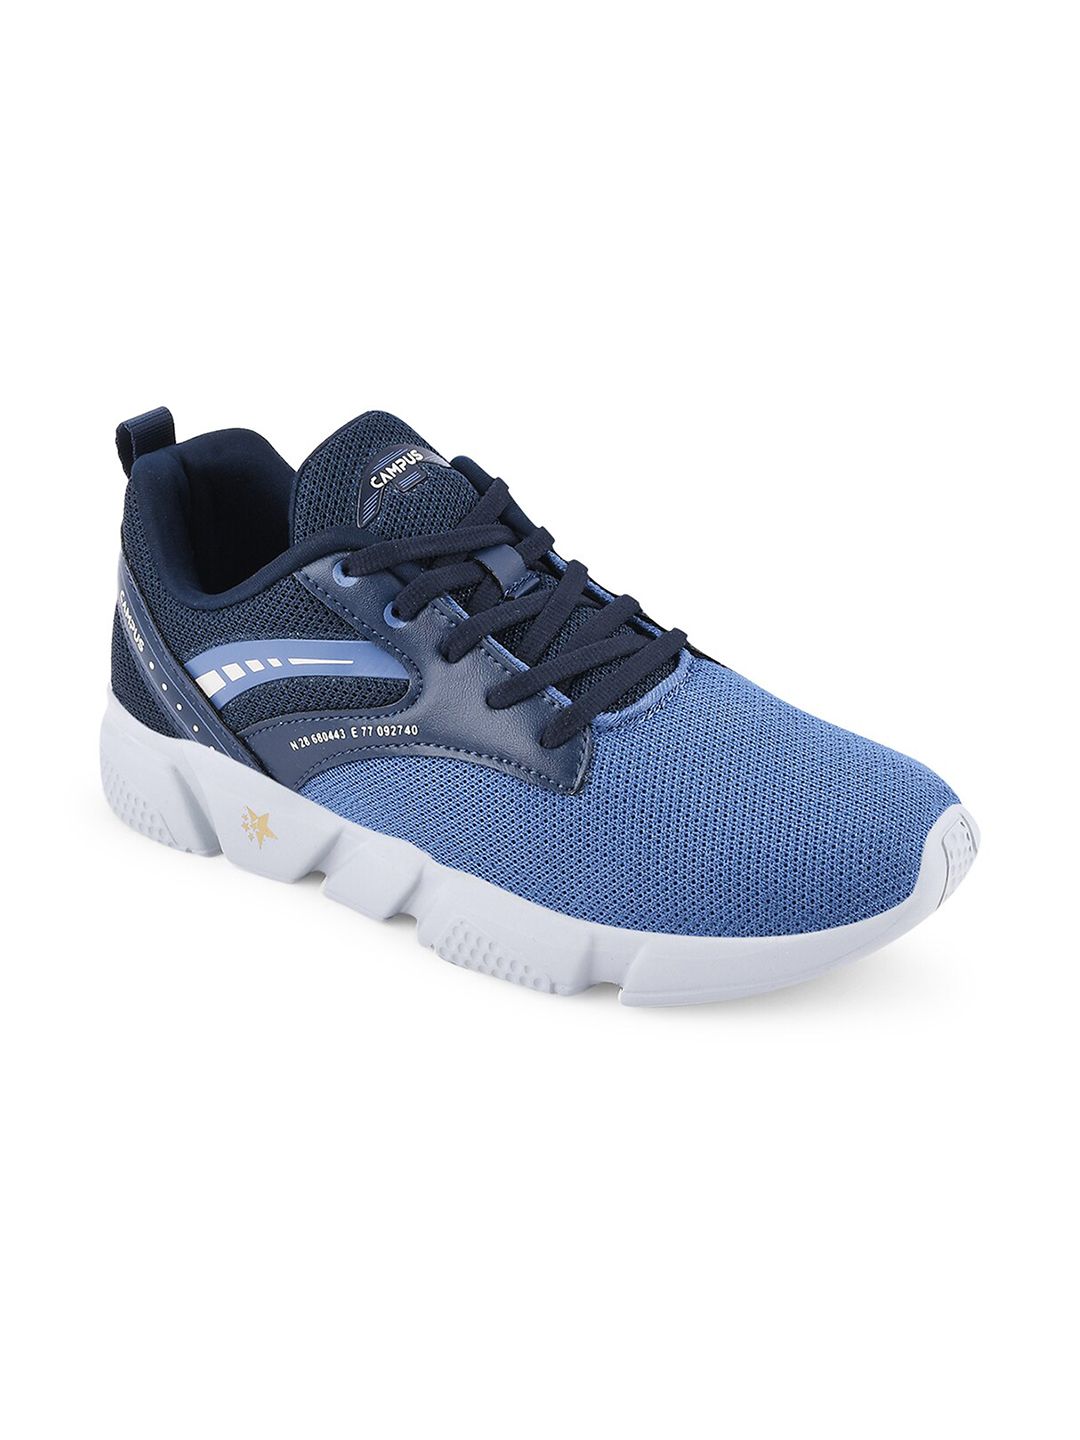 Campus Women Navy Blue Mesh Running Non-Marking Shoes Price in India